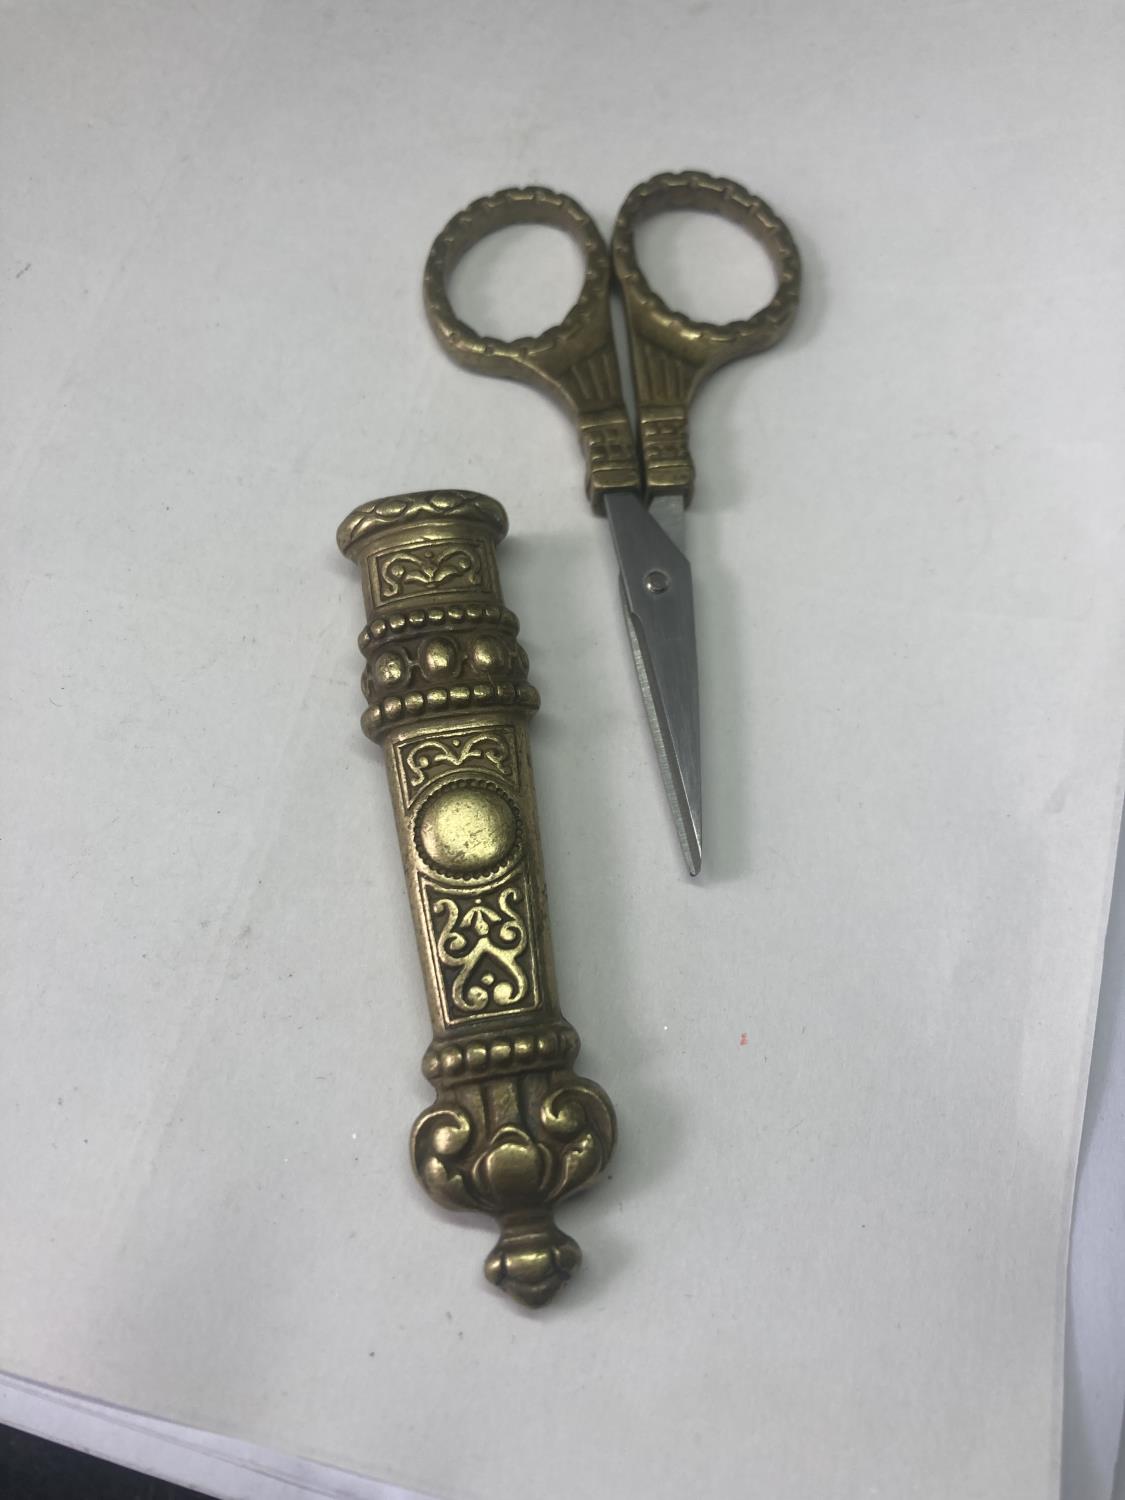 A PAIR OF DECORATIVE BRASS DRESS MAKING SCISSORS AND A NEEDLE CASE - Image 5 of 8